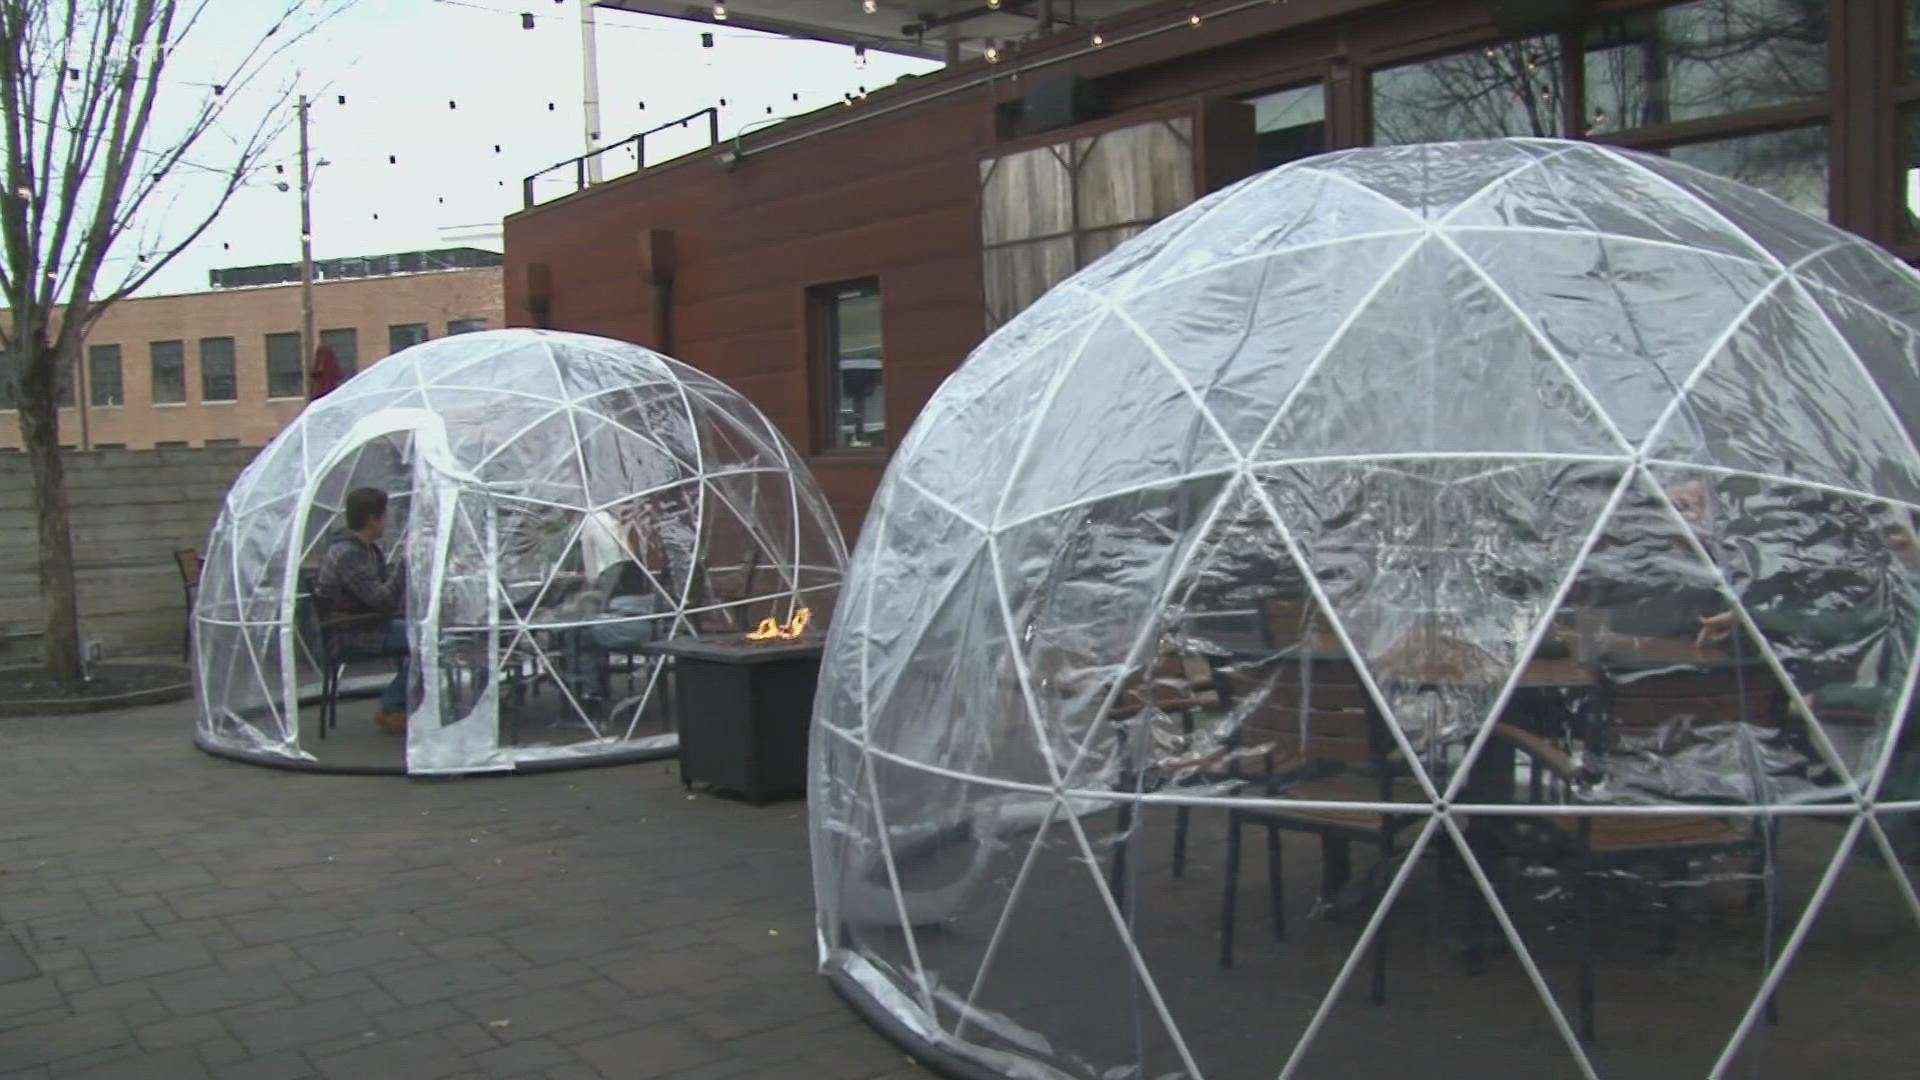 For the winter, Balter Beerworks set up outdoor igloos to seat people and keep them warm.